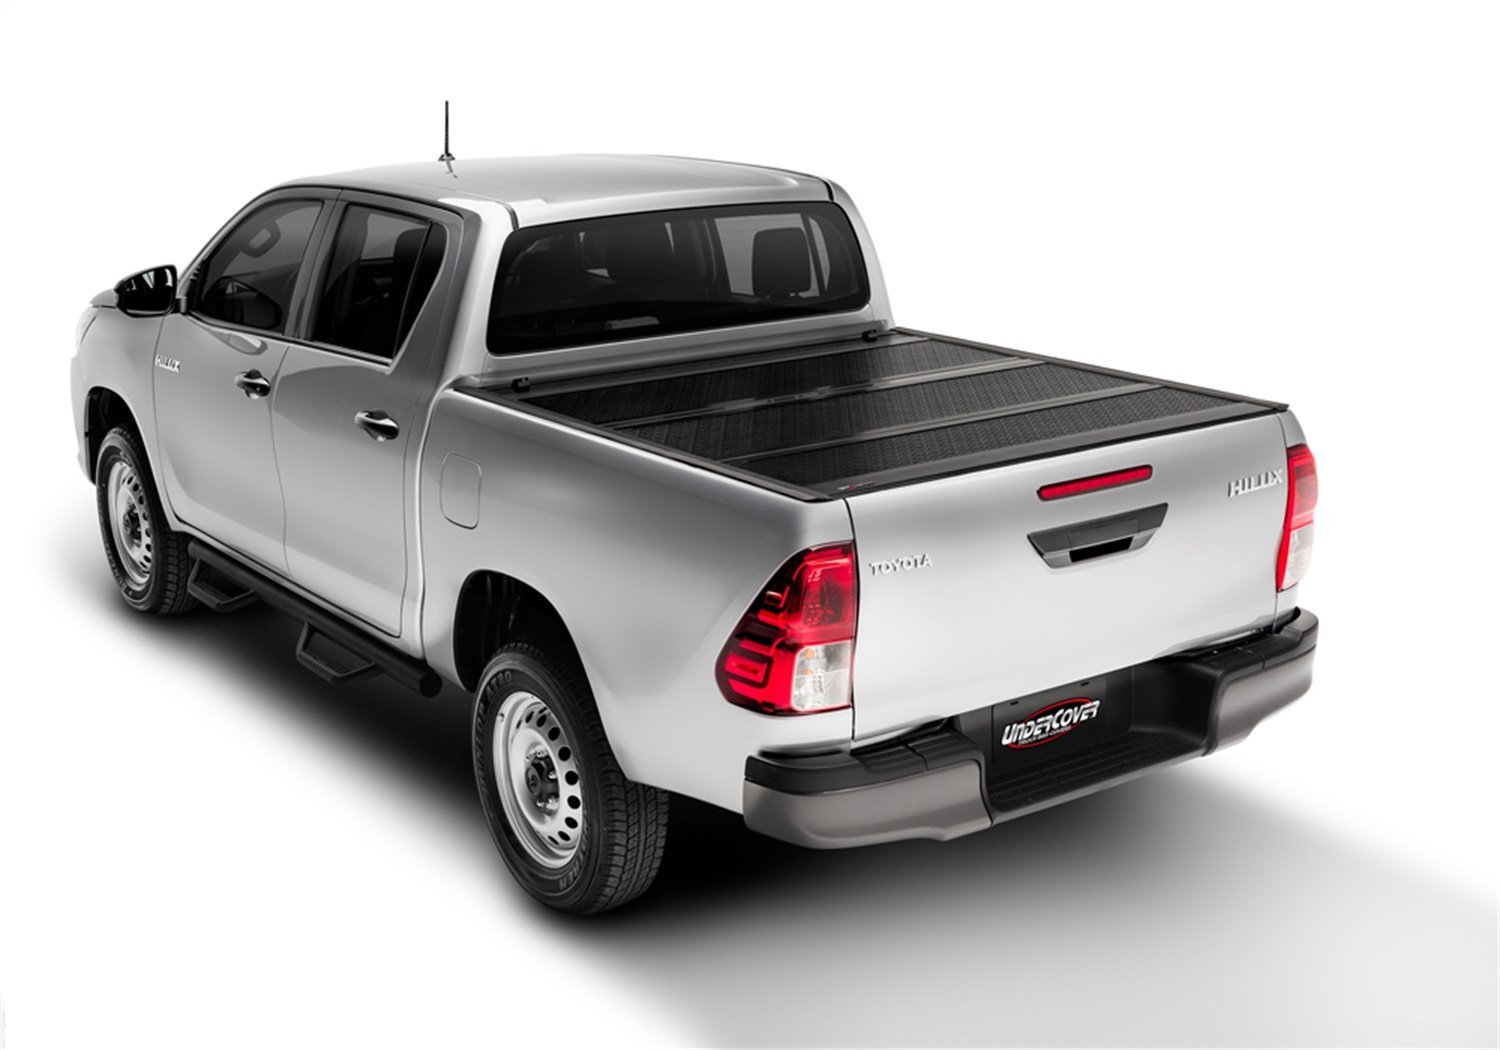 FX41014 Flex Hard Folding Cover, Fits Select Toyota Tacoma 5'Bed Crew w/o Bedside Storage Boxes, Black Textured